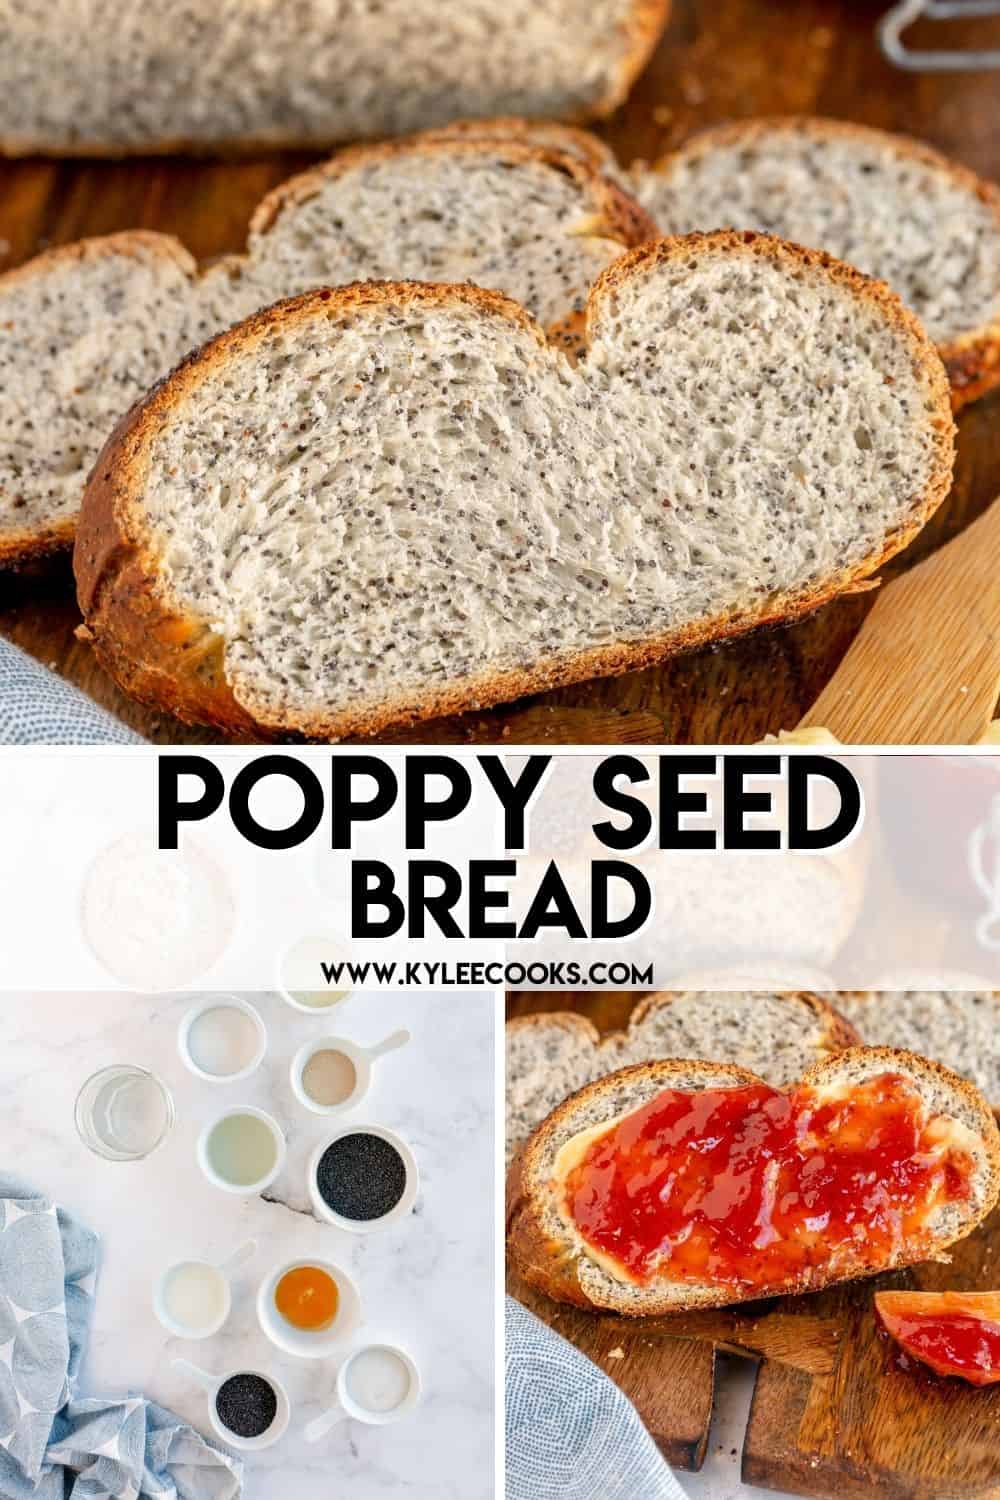 braided bread with poppy seeds on a wooden board with text overlay